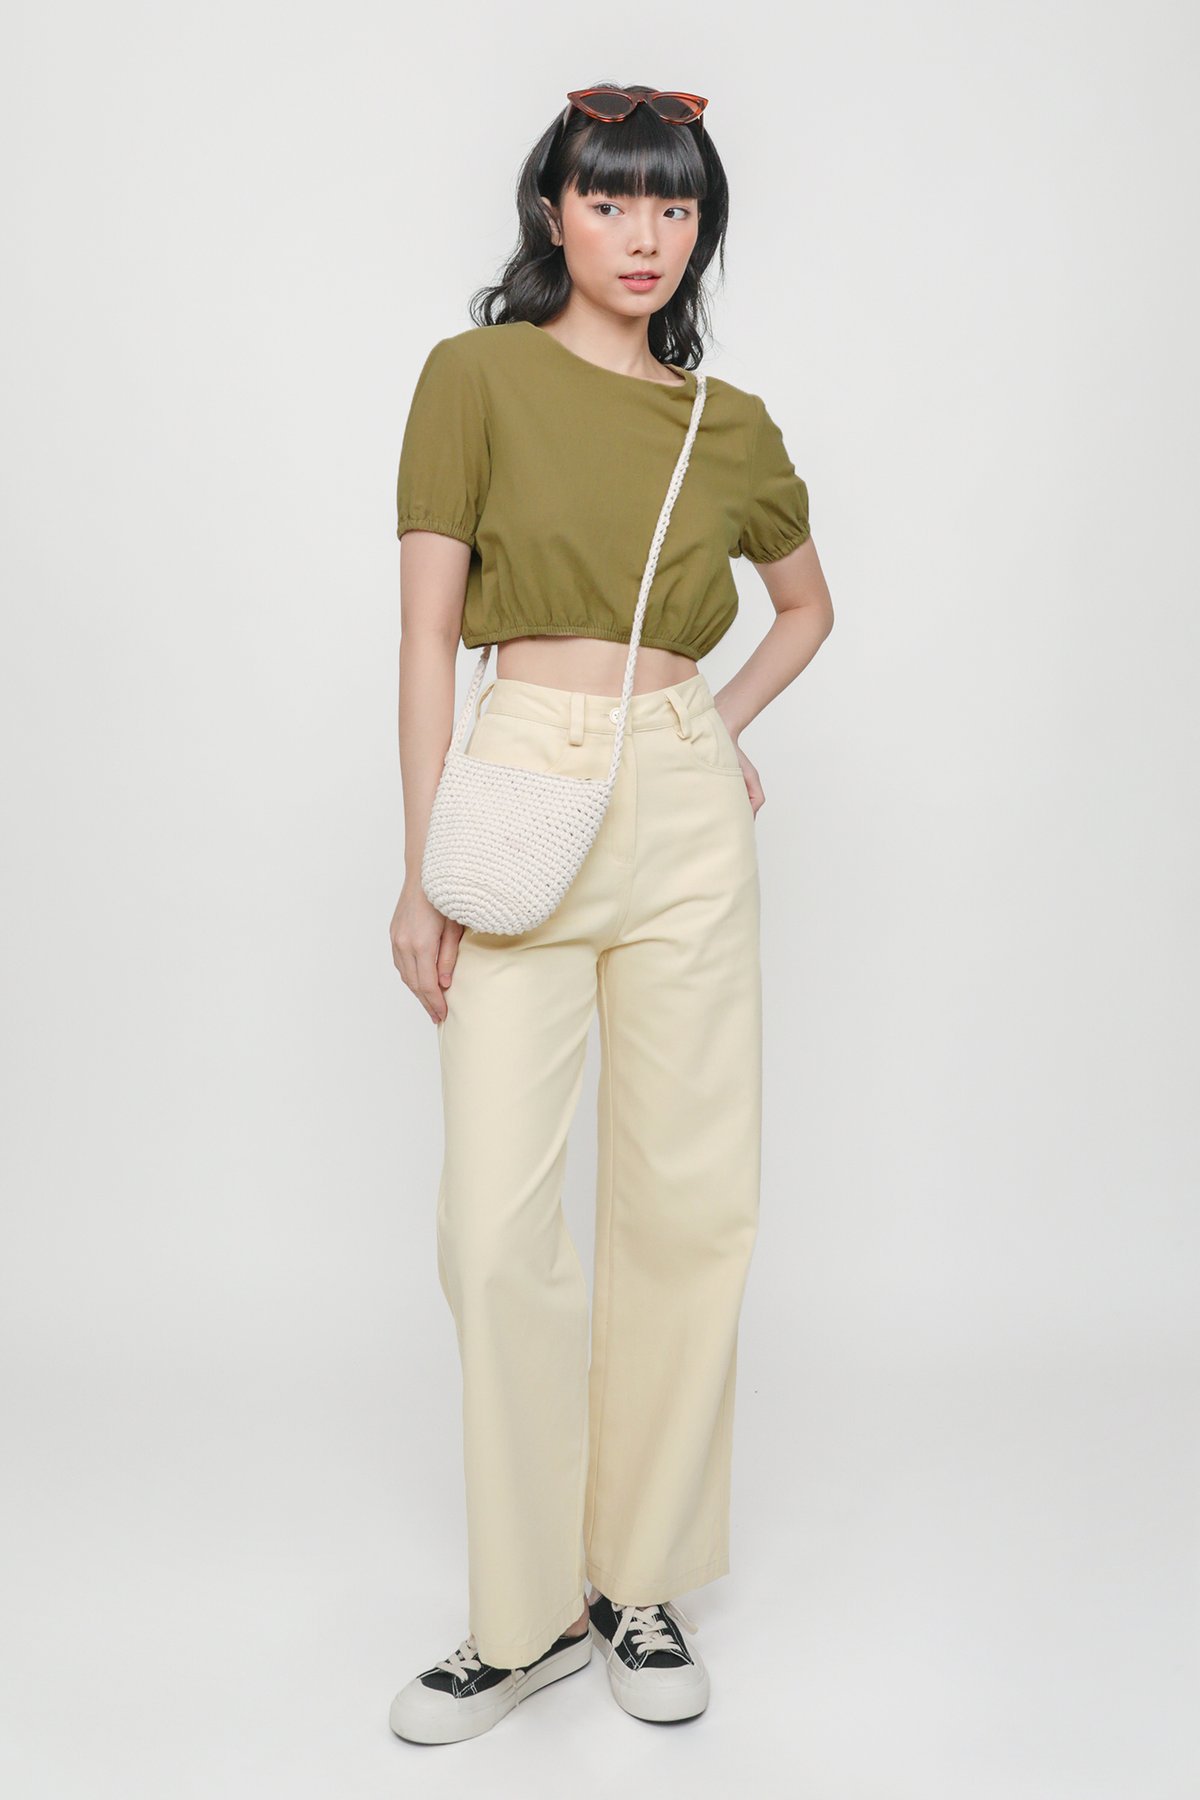 Liv Linen Puffy Sleeve Top (Burnt Olive)